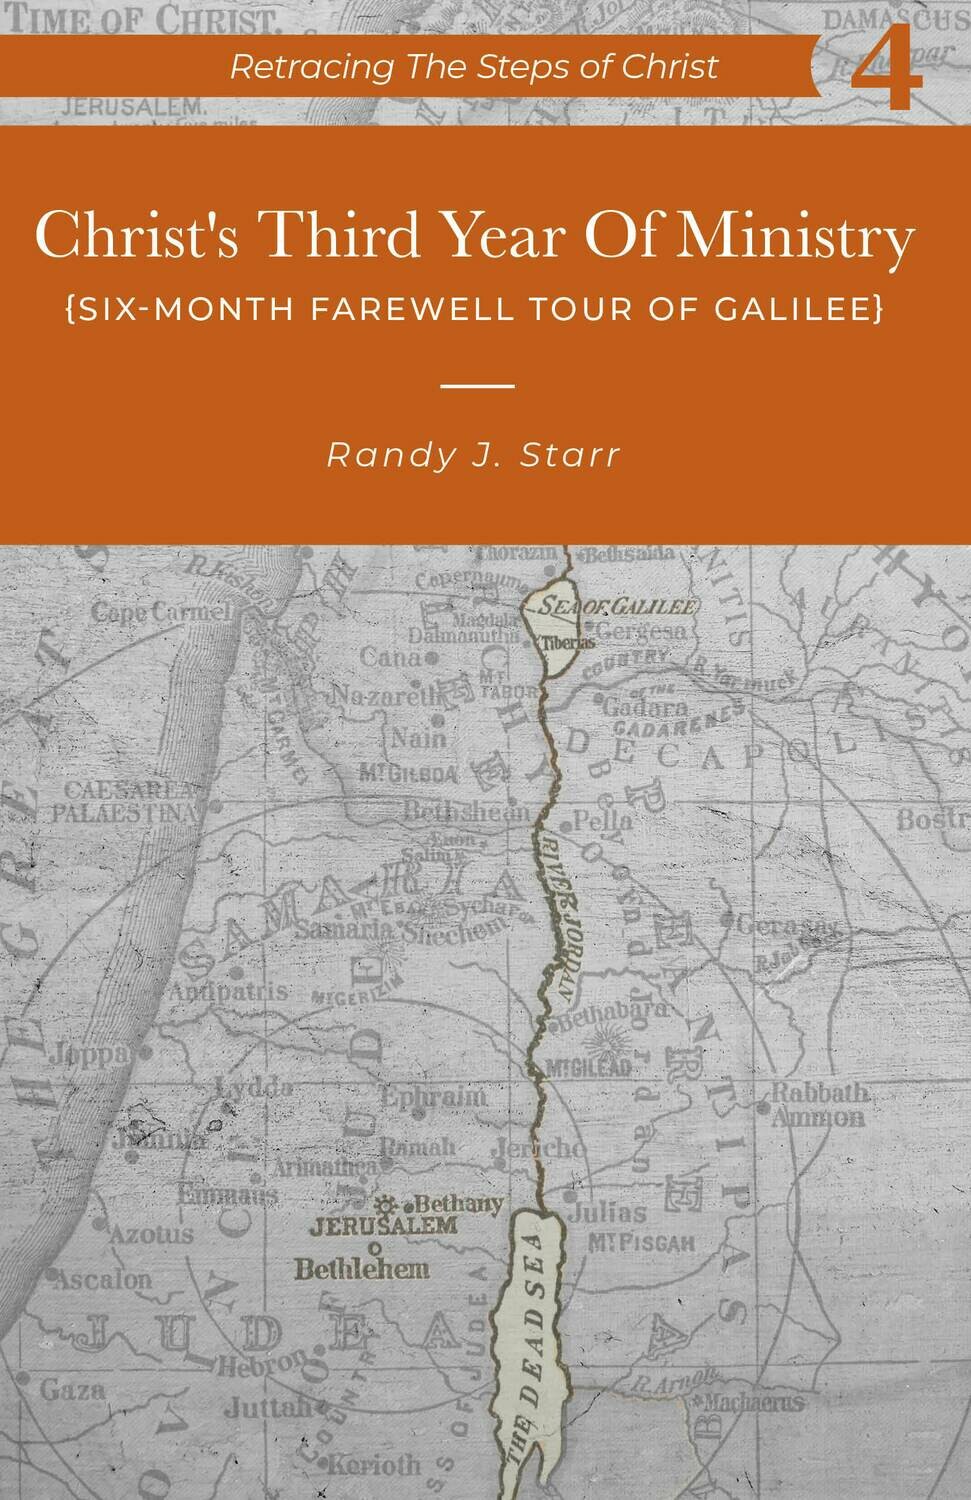 Retracing the Steps of Christ, v. 4 of 6 volumes- Christ's Third Year of Ministry -His 6 month Farewell Tour of Galilee